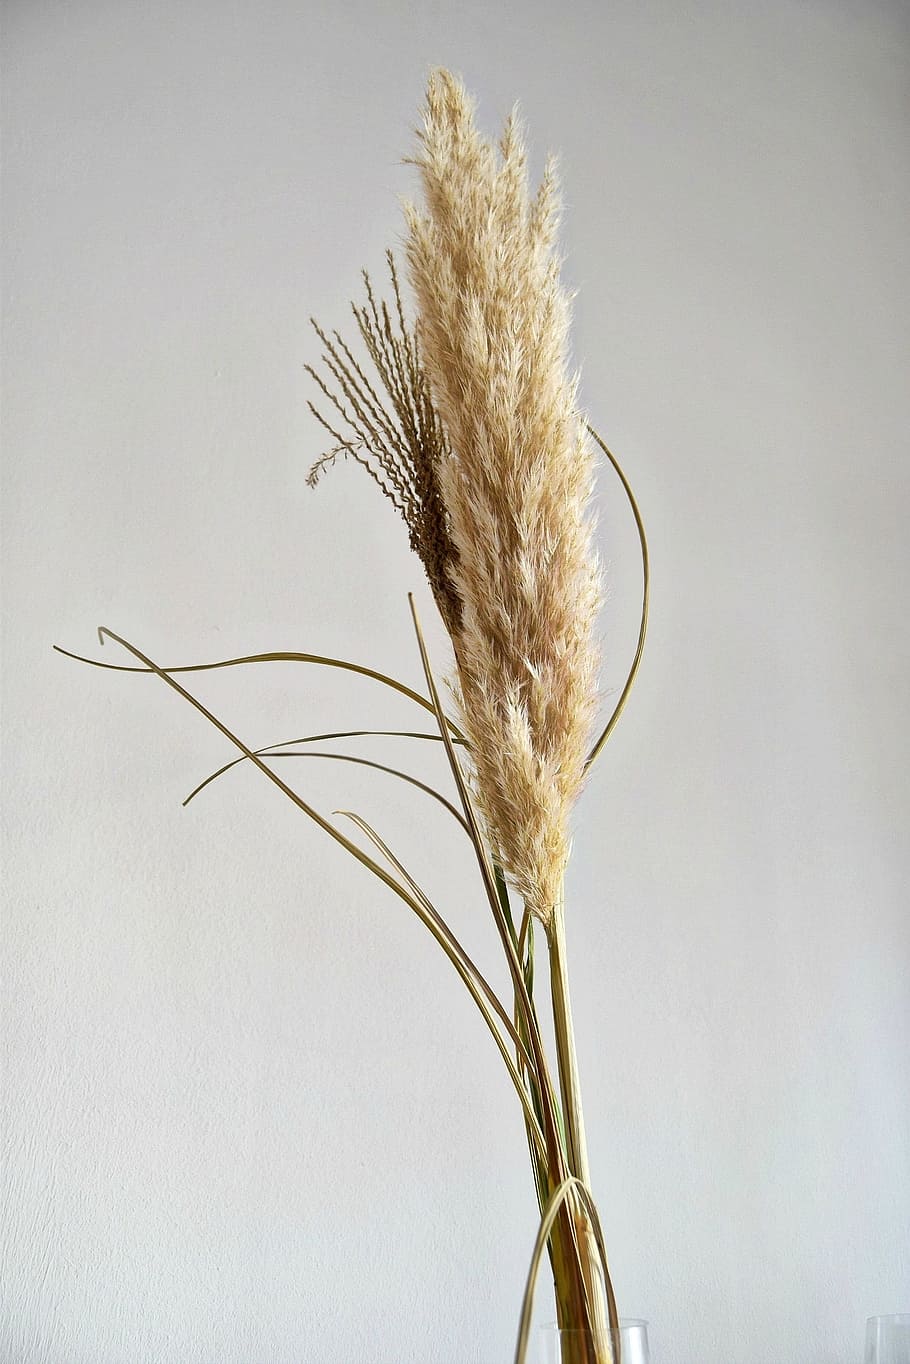 grass, plant, dry, nature, summer, growth, crop, close-up, plant stem, beauty in nature